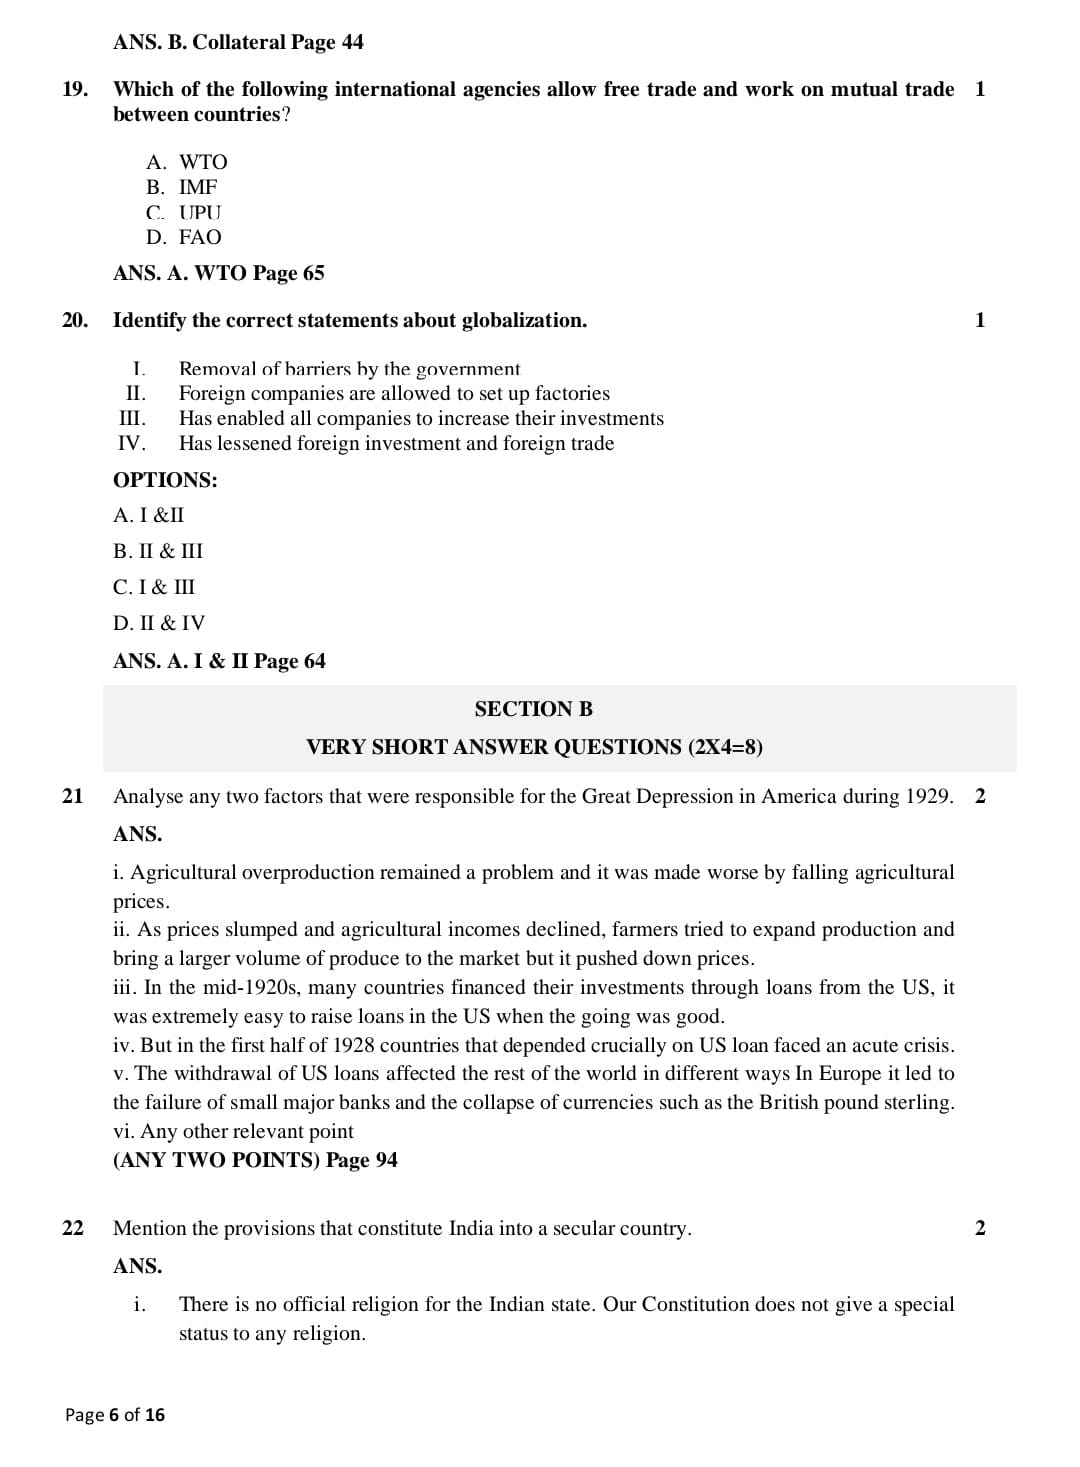 cbse class 10 social science official sample question paper6